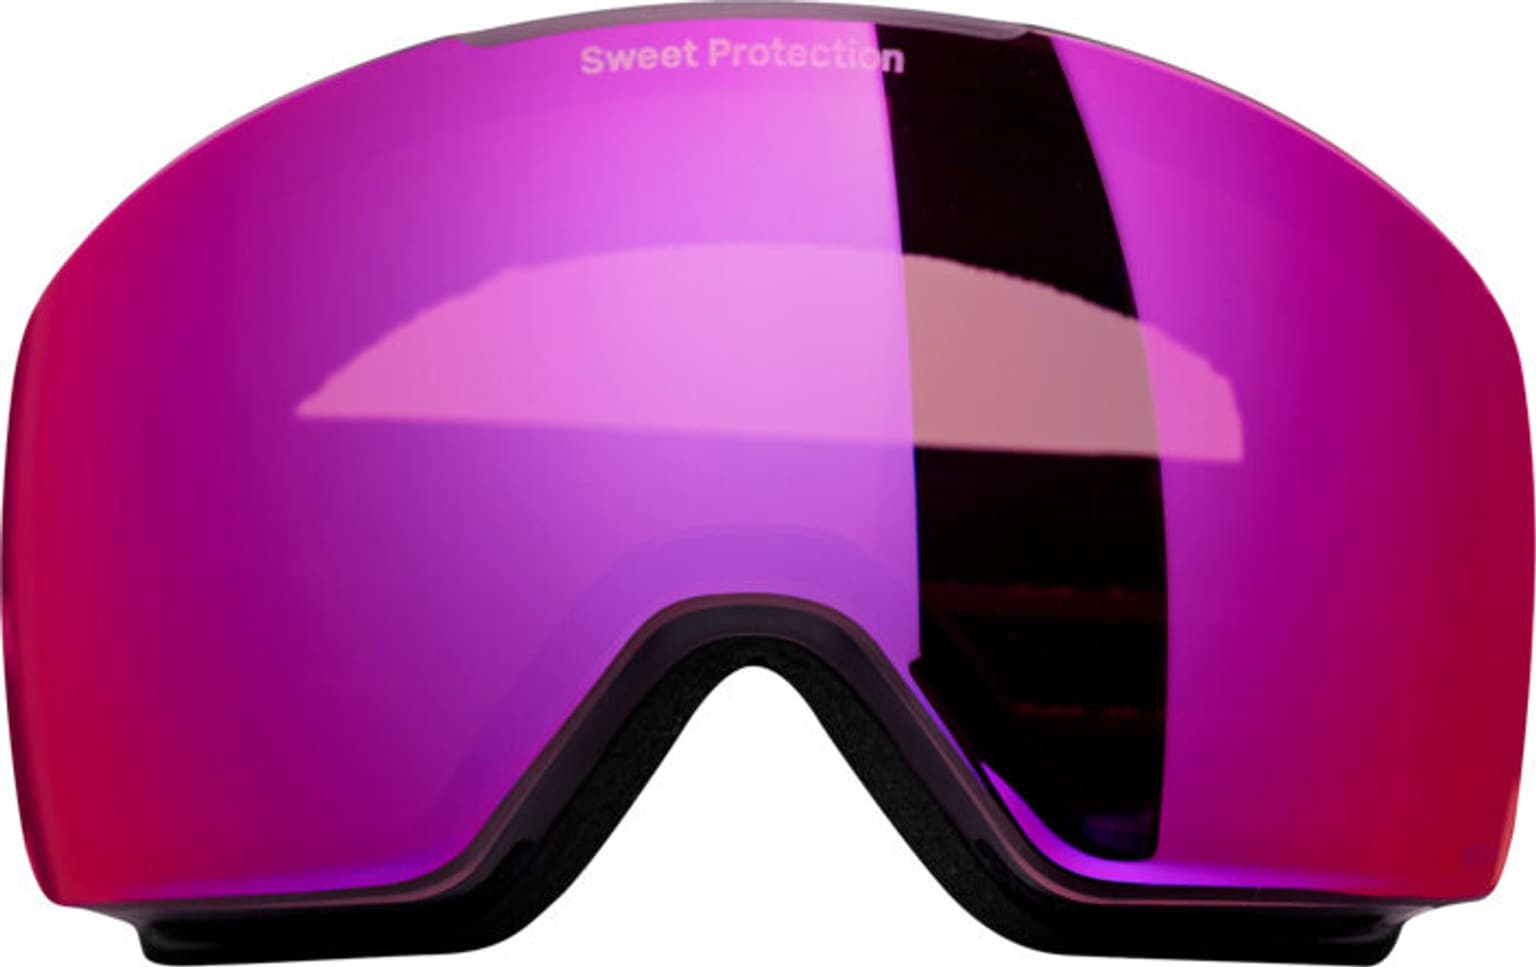 Sweet Protection Sweet Protection Connor RIG Reflect Skibrille schwarz 2